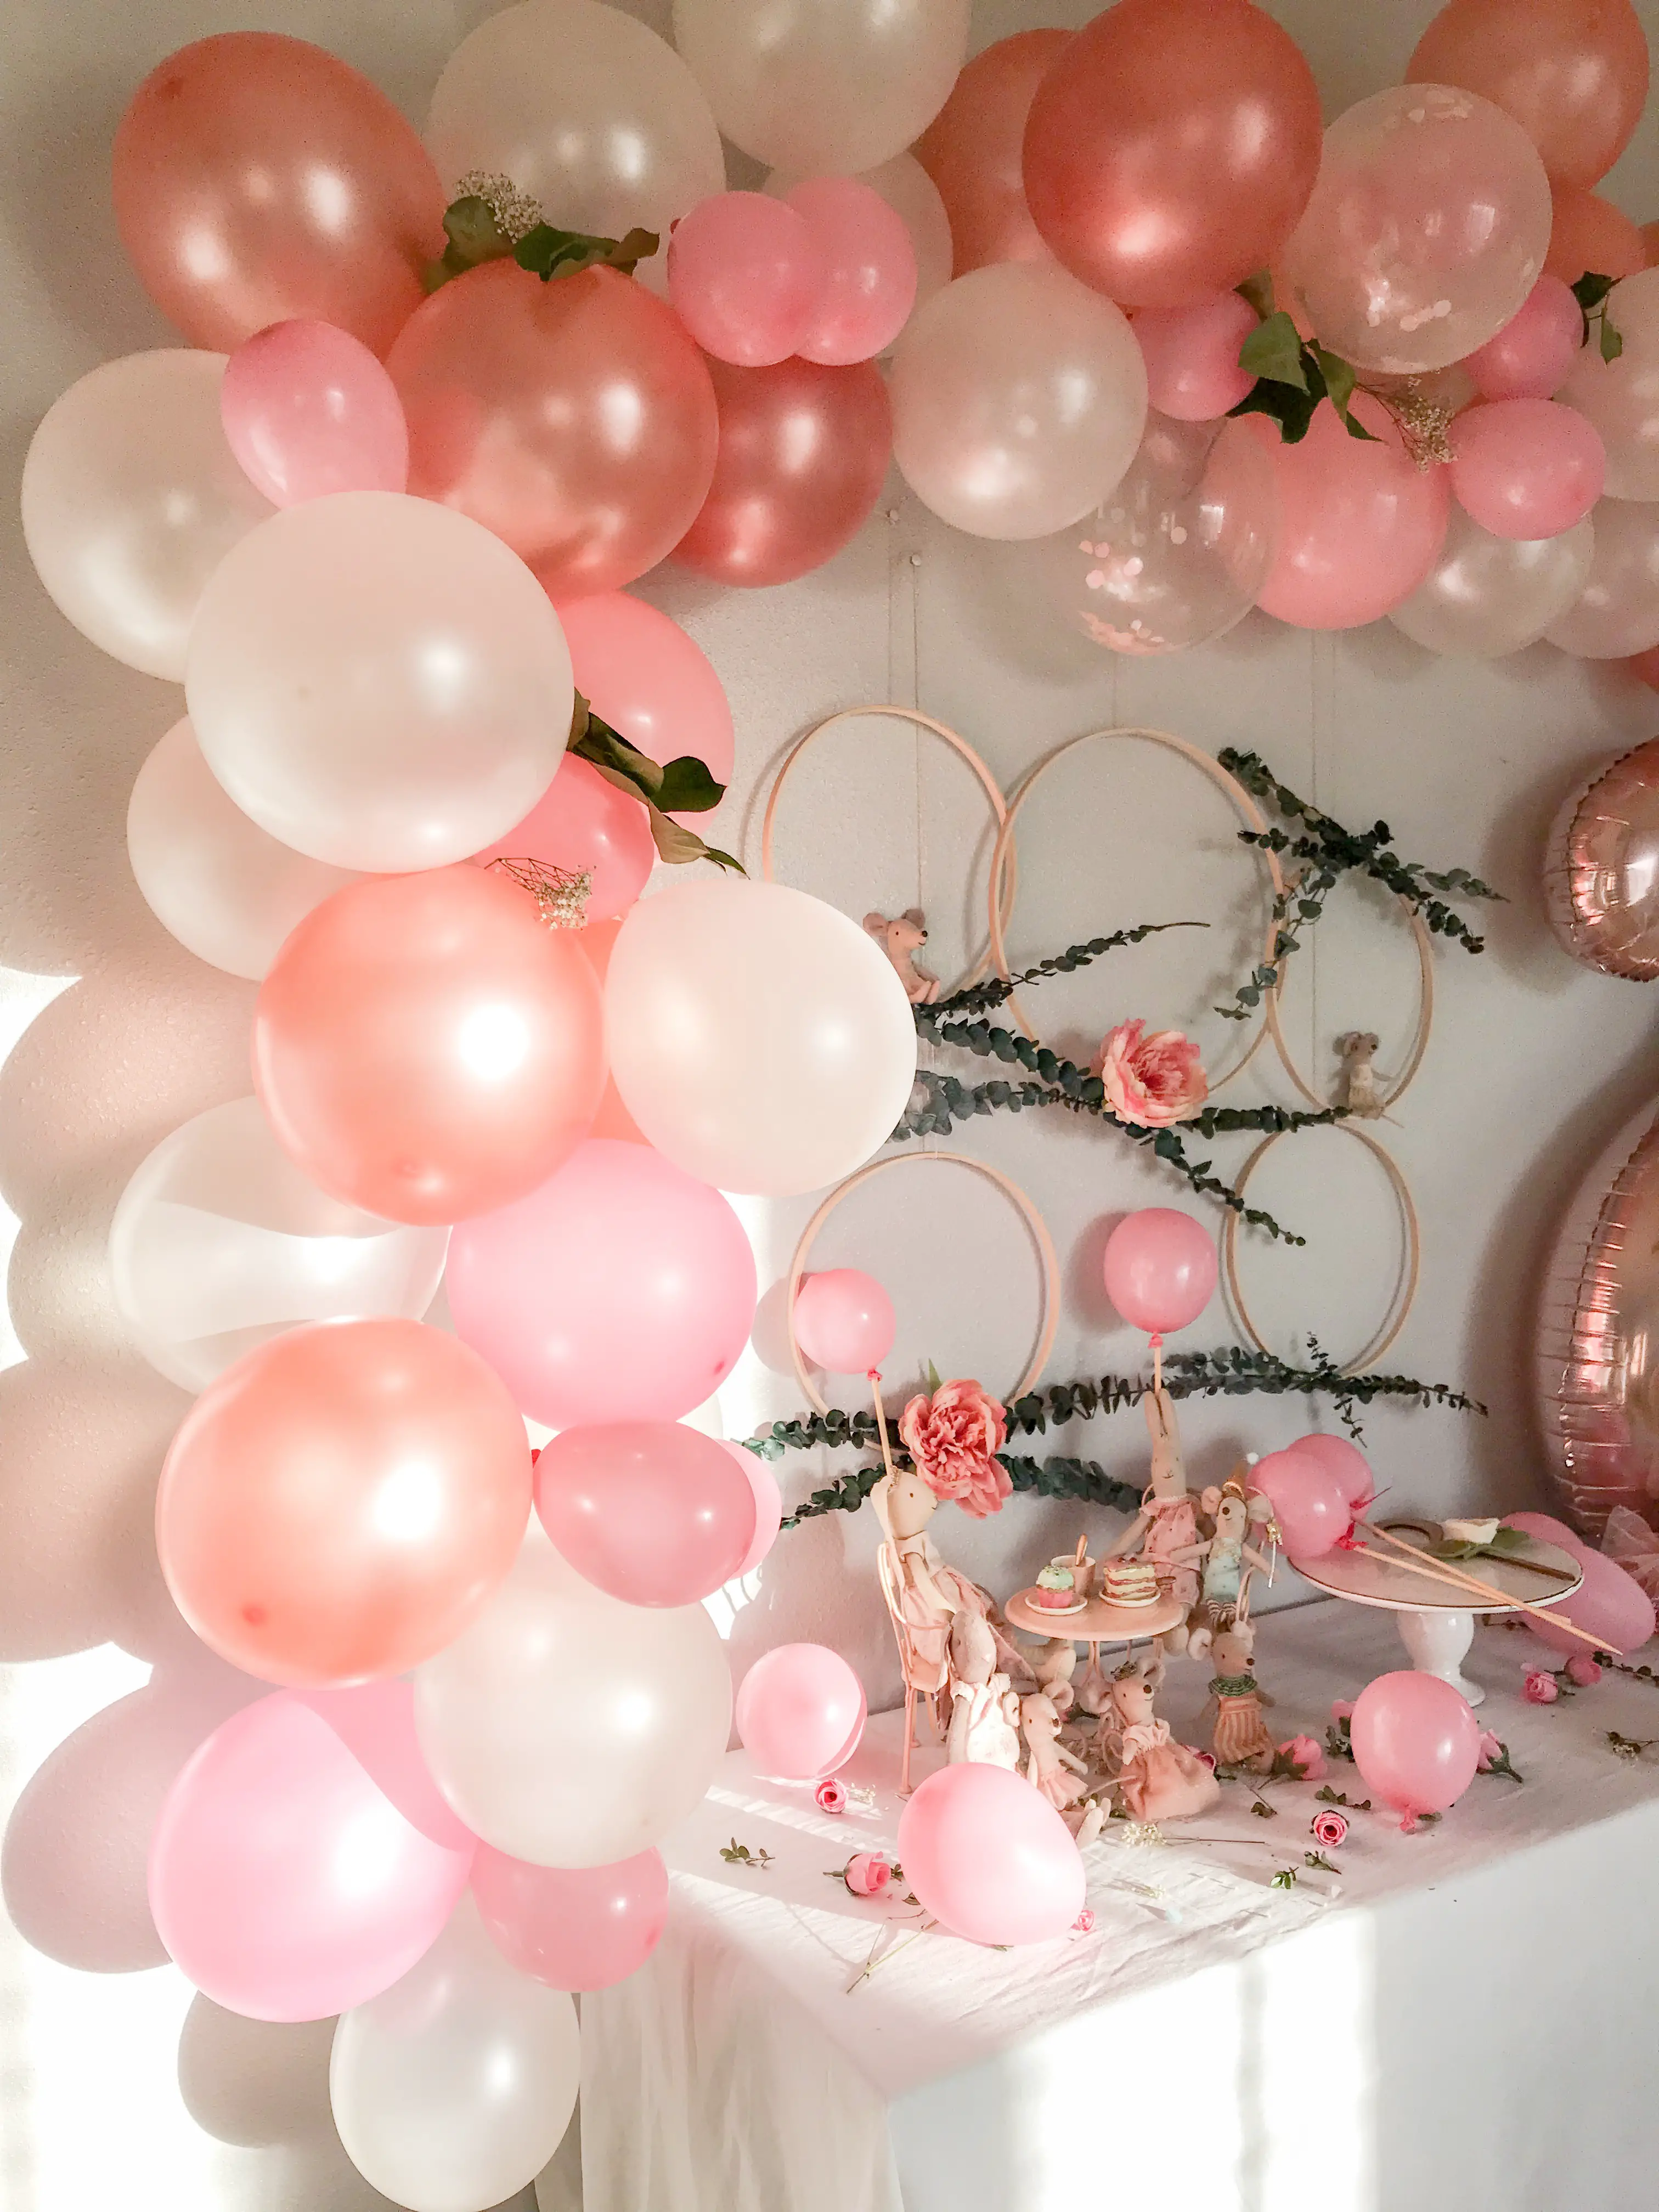 How To Make A Balloon Arch With Glue Dots